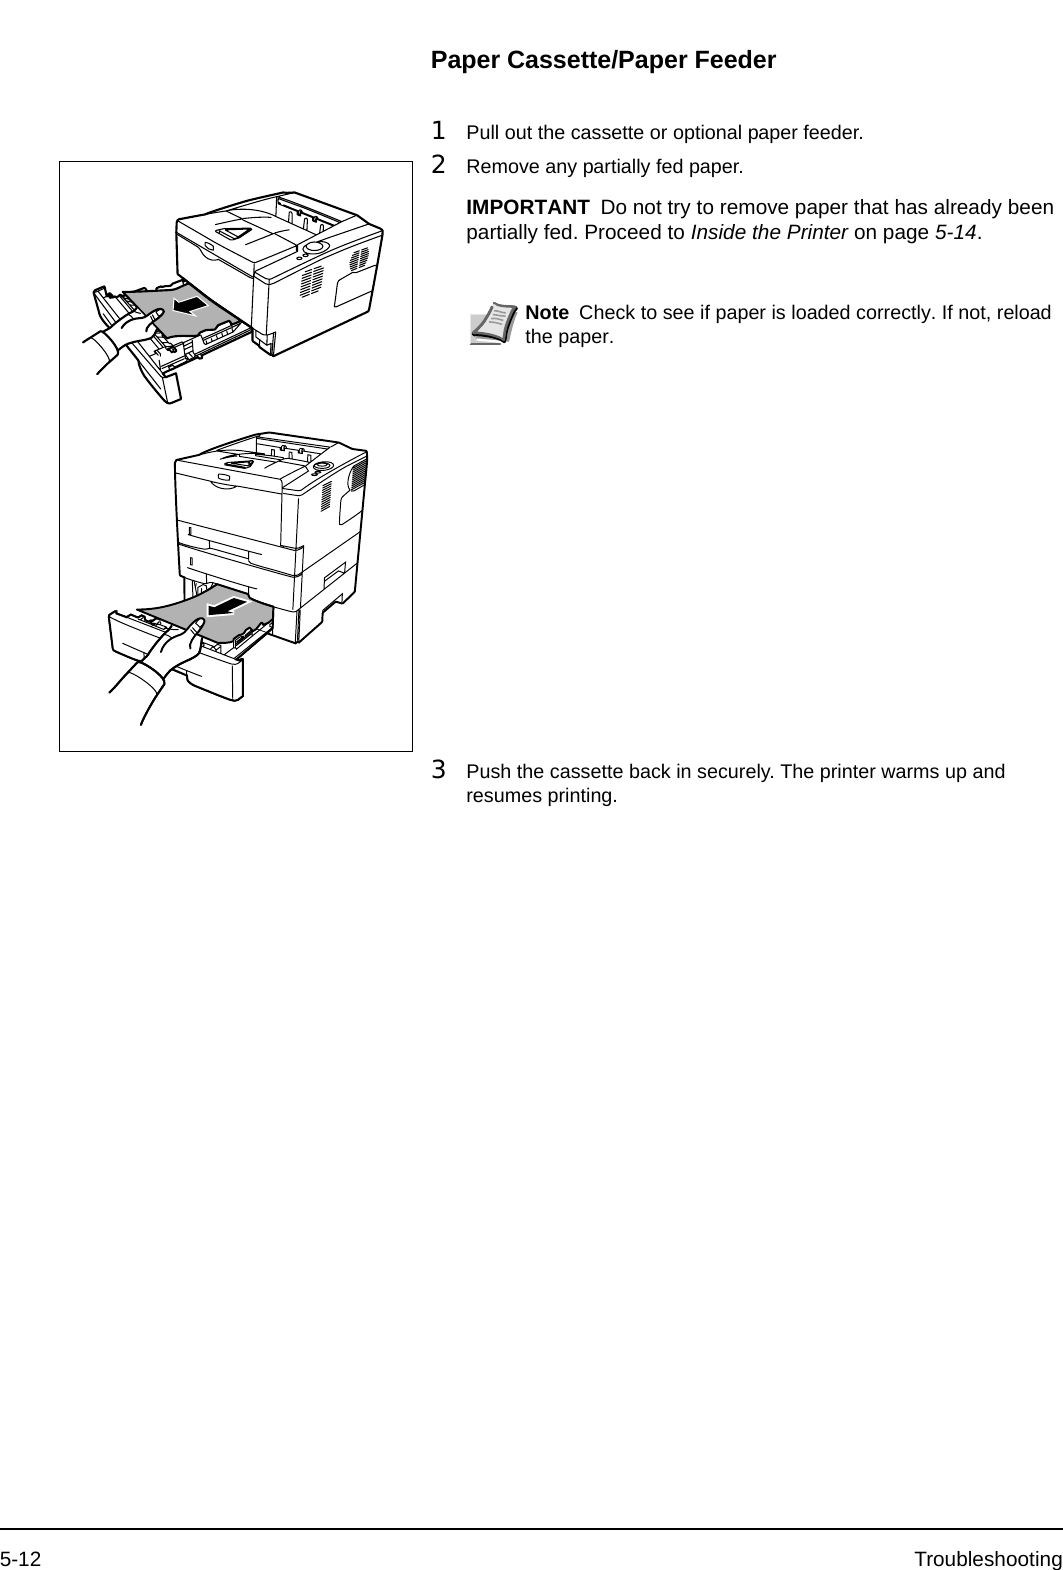 5-12 TroubleshootingPaper Cassette/Paper Feeder1Pull out the cassette or optional paper feeder.2Remove any partially fed paper. 3Push the cassette back in securely. The printer warms up and resumes printing.IMPORTANT Do not try to remove paper that has already been partially fed. Proceed to Inside the Printer on page 5-14.Note Check to see if paper is loaded correctly. If not, reload the paper.